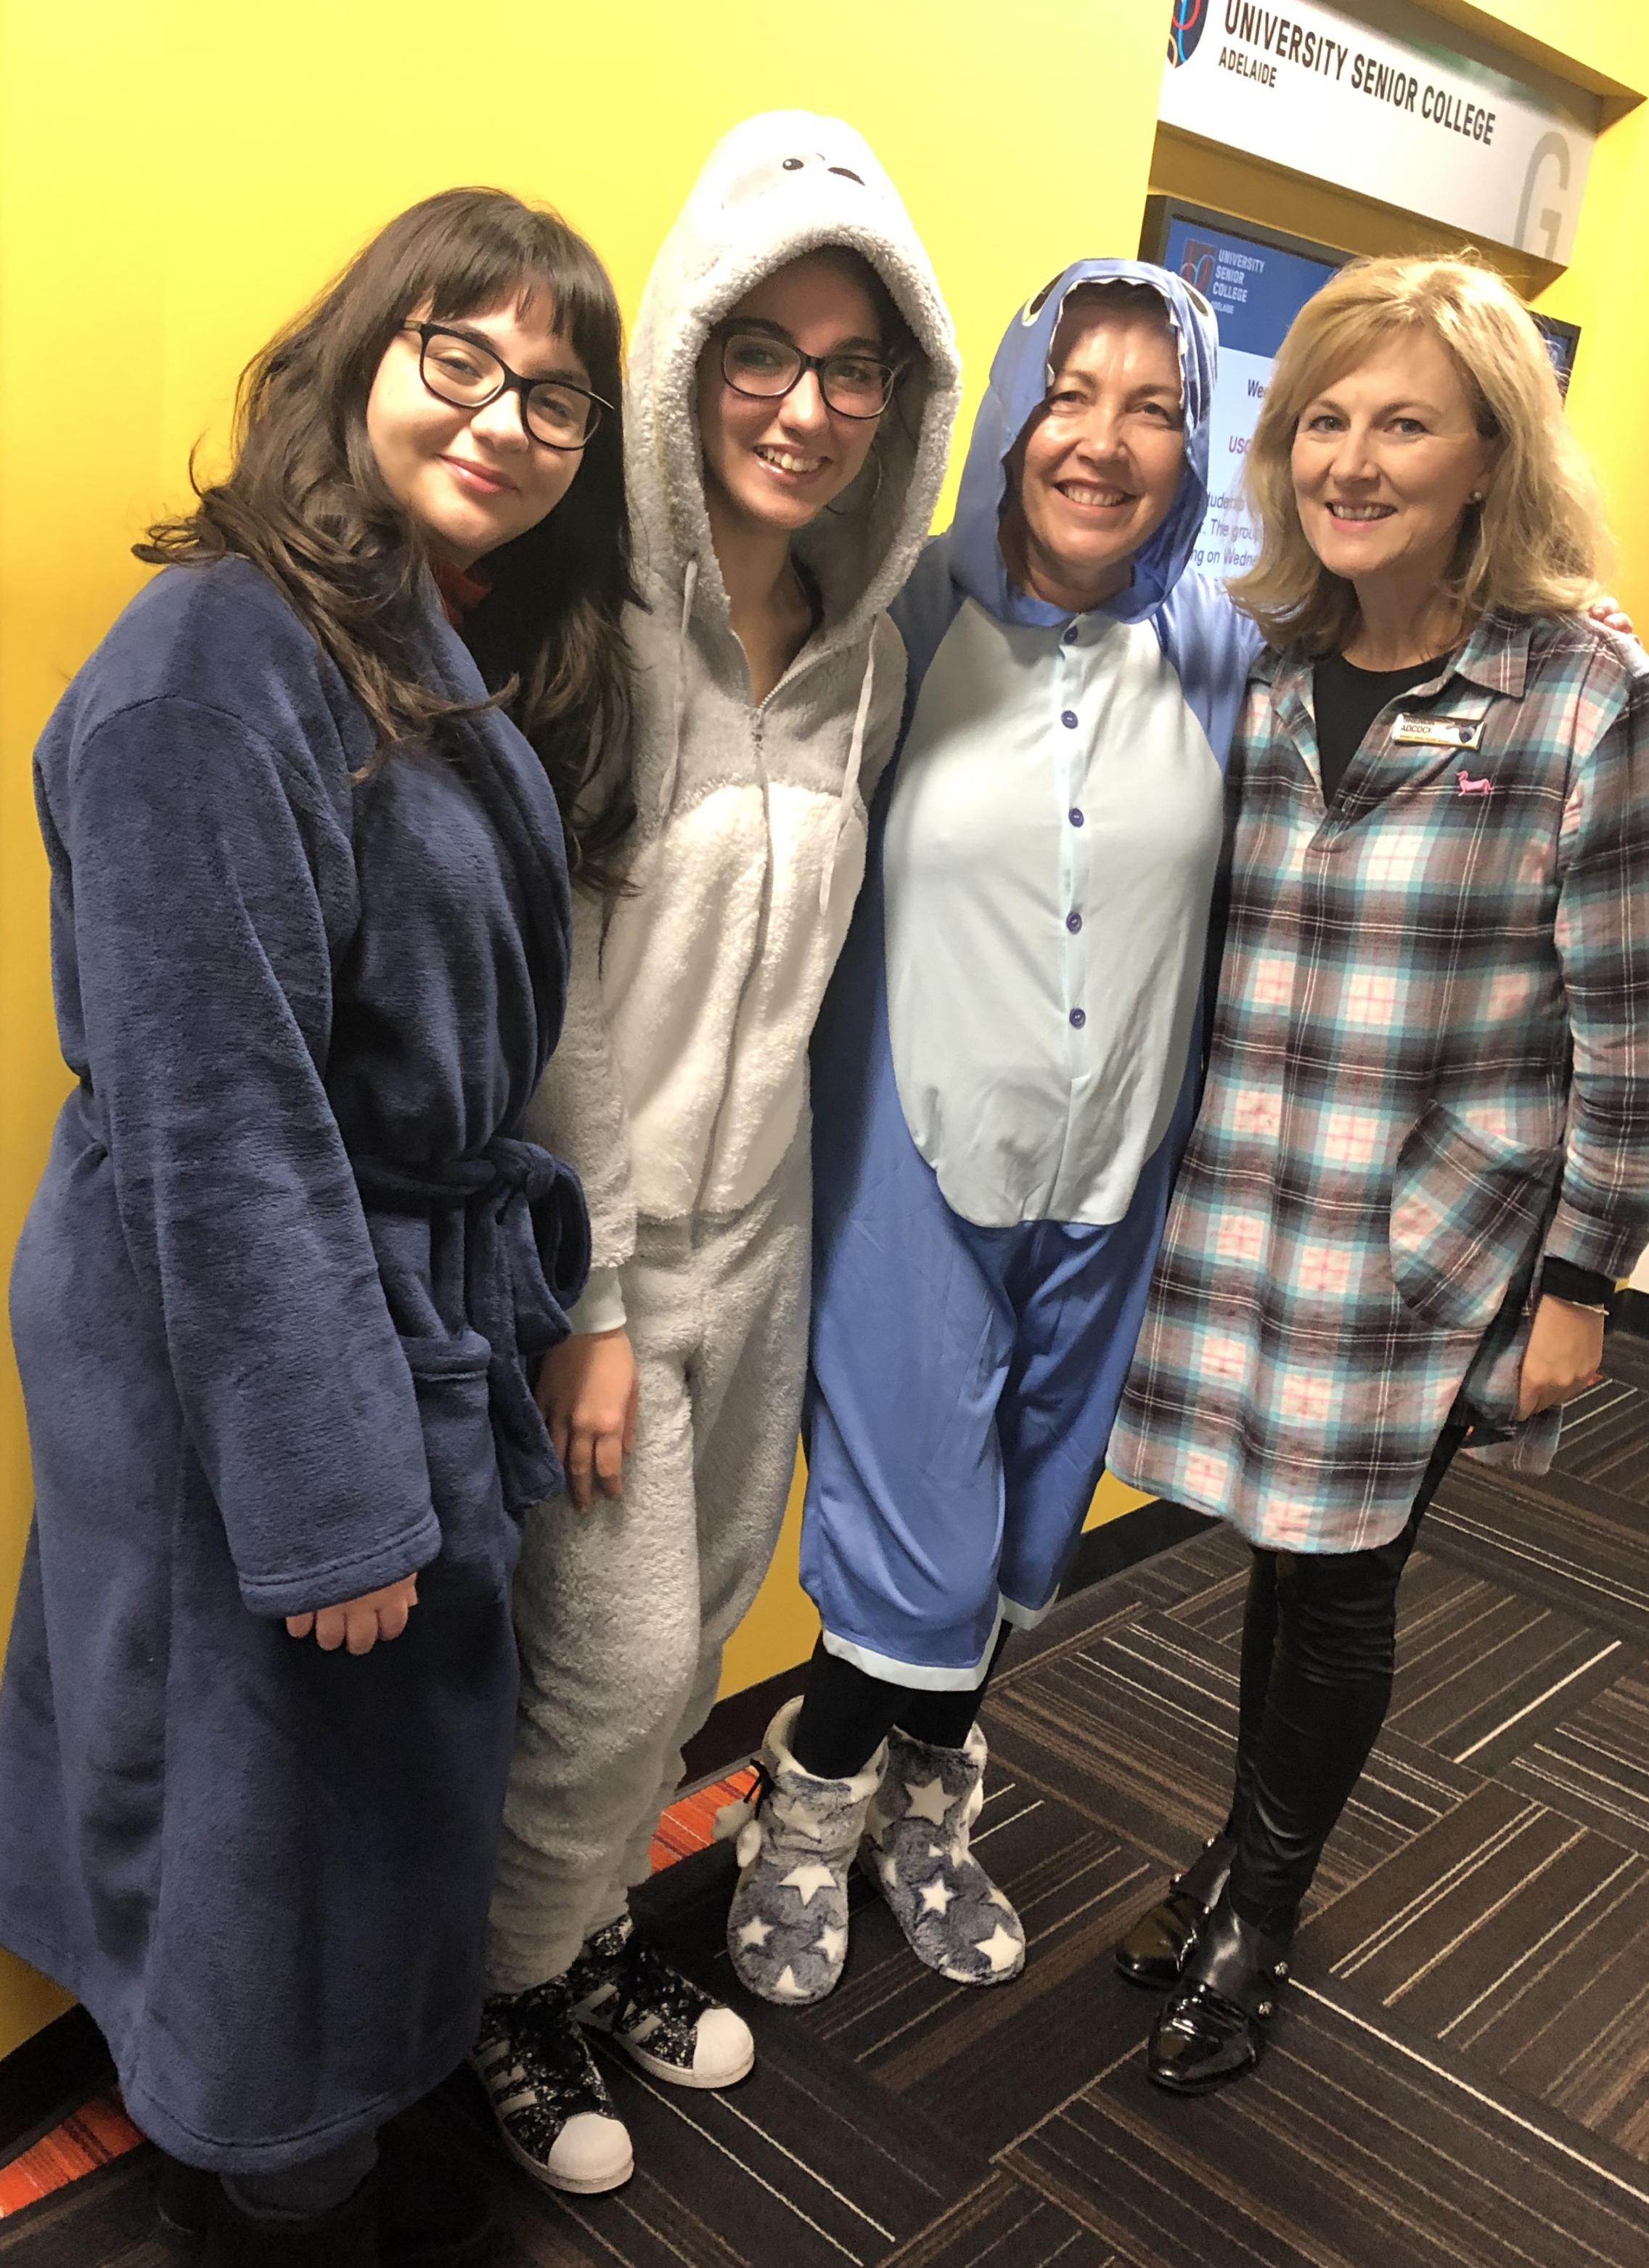 Students and staff wearing pajamas